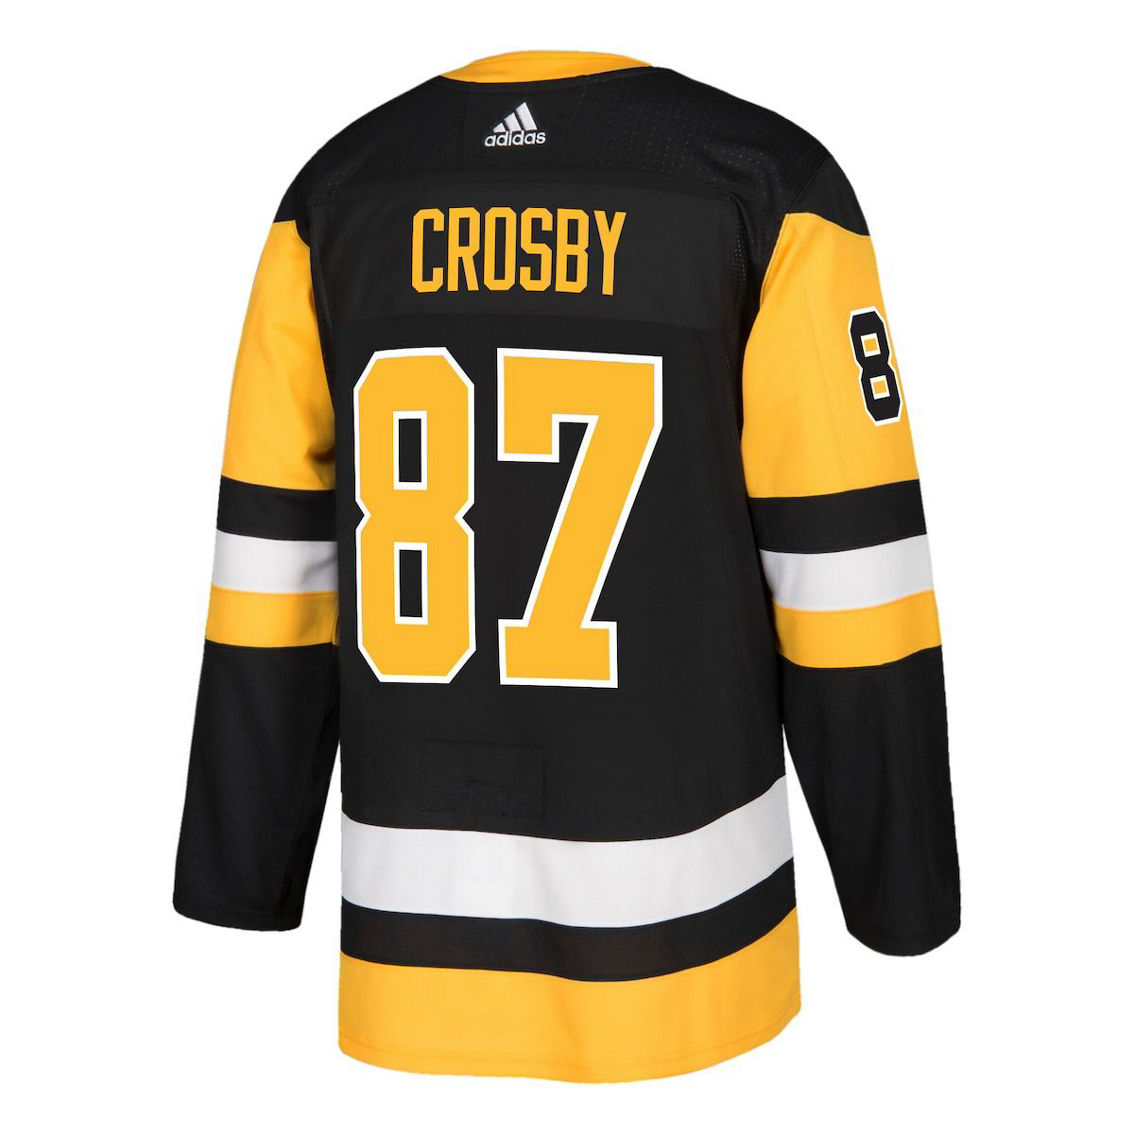 adidas Men's Sidney Crosby Black Pittsburgh Penguins Authentic Player Jersey - Image 4 of 4